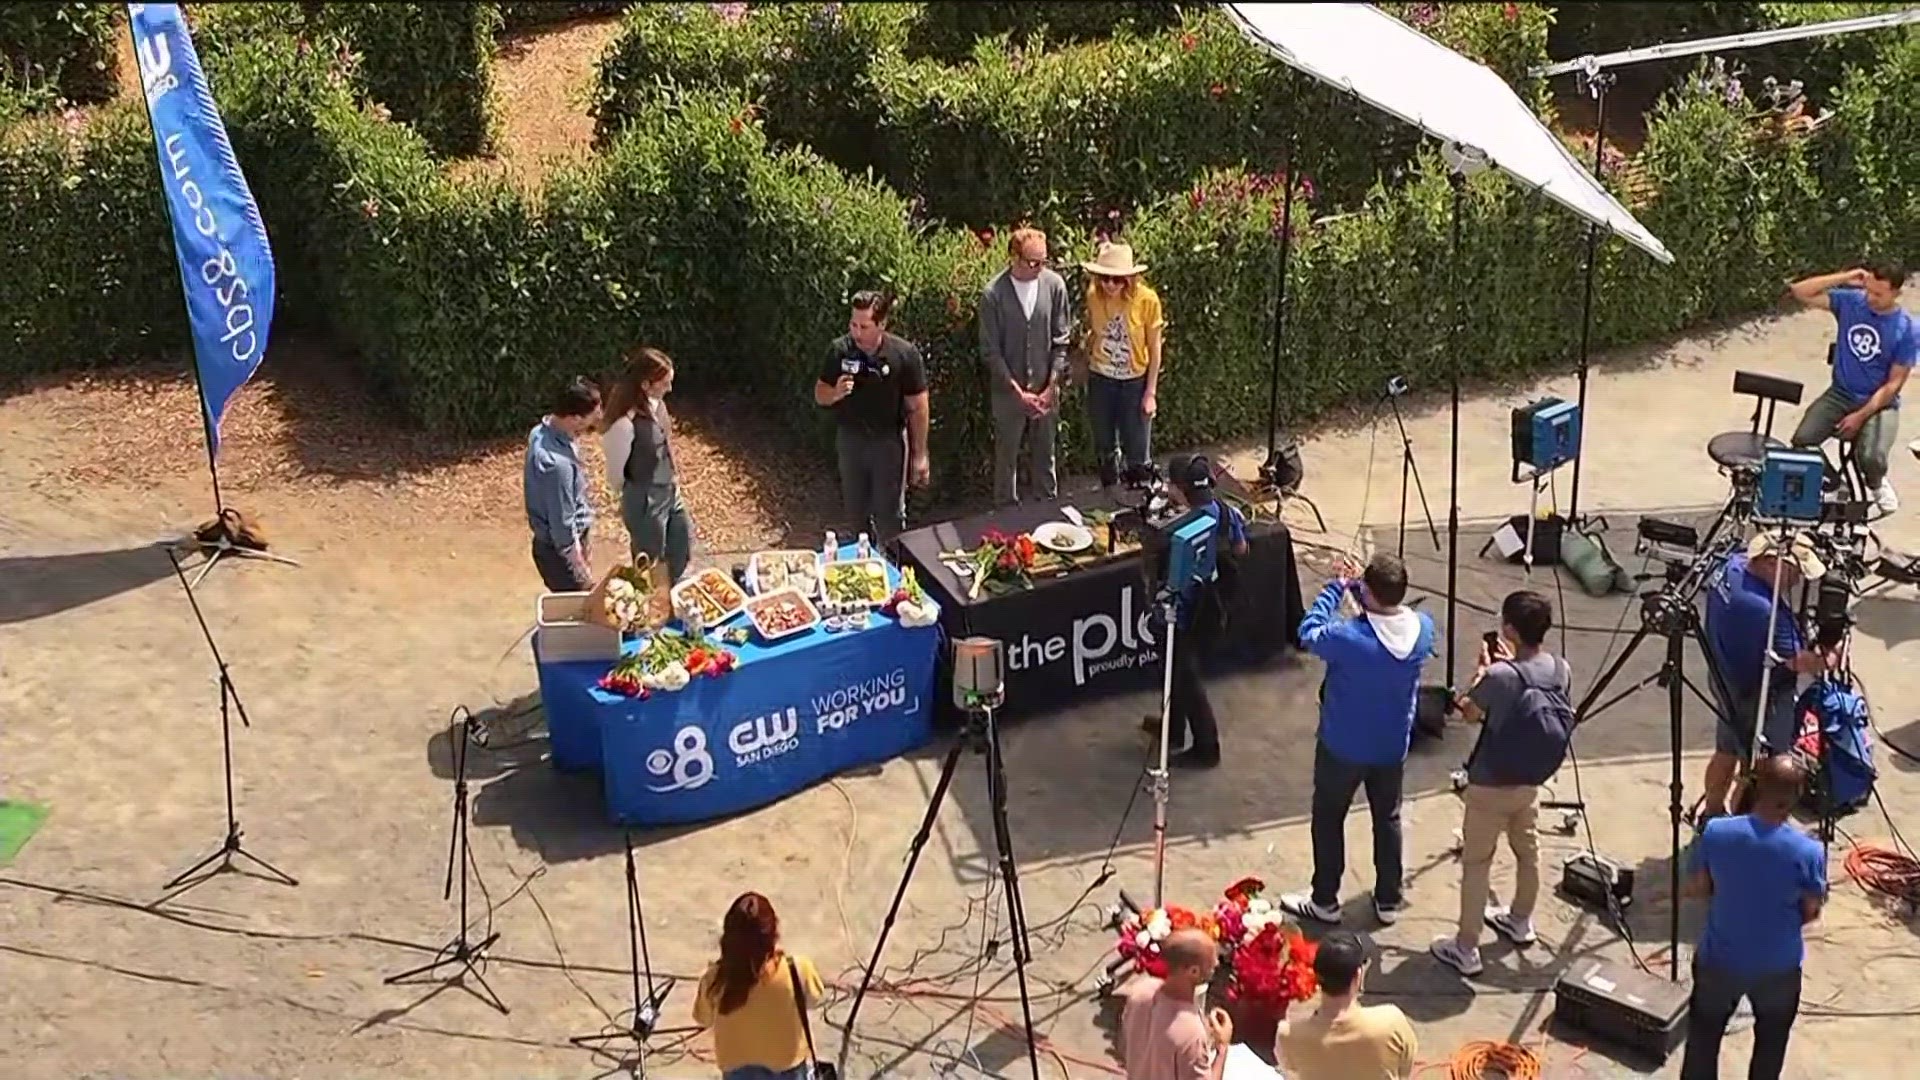 The Plot and Parakeet Cafe showed off their amazing menu live on CBS 8 from the Carlsbad Flower Fields.